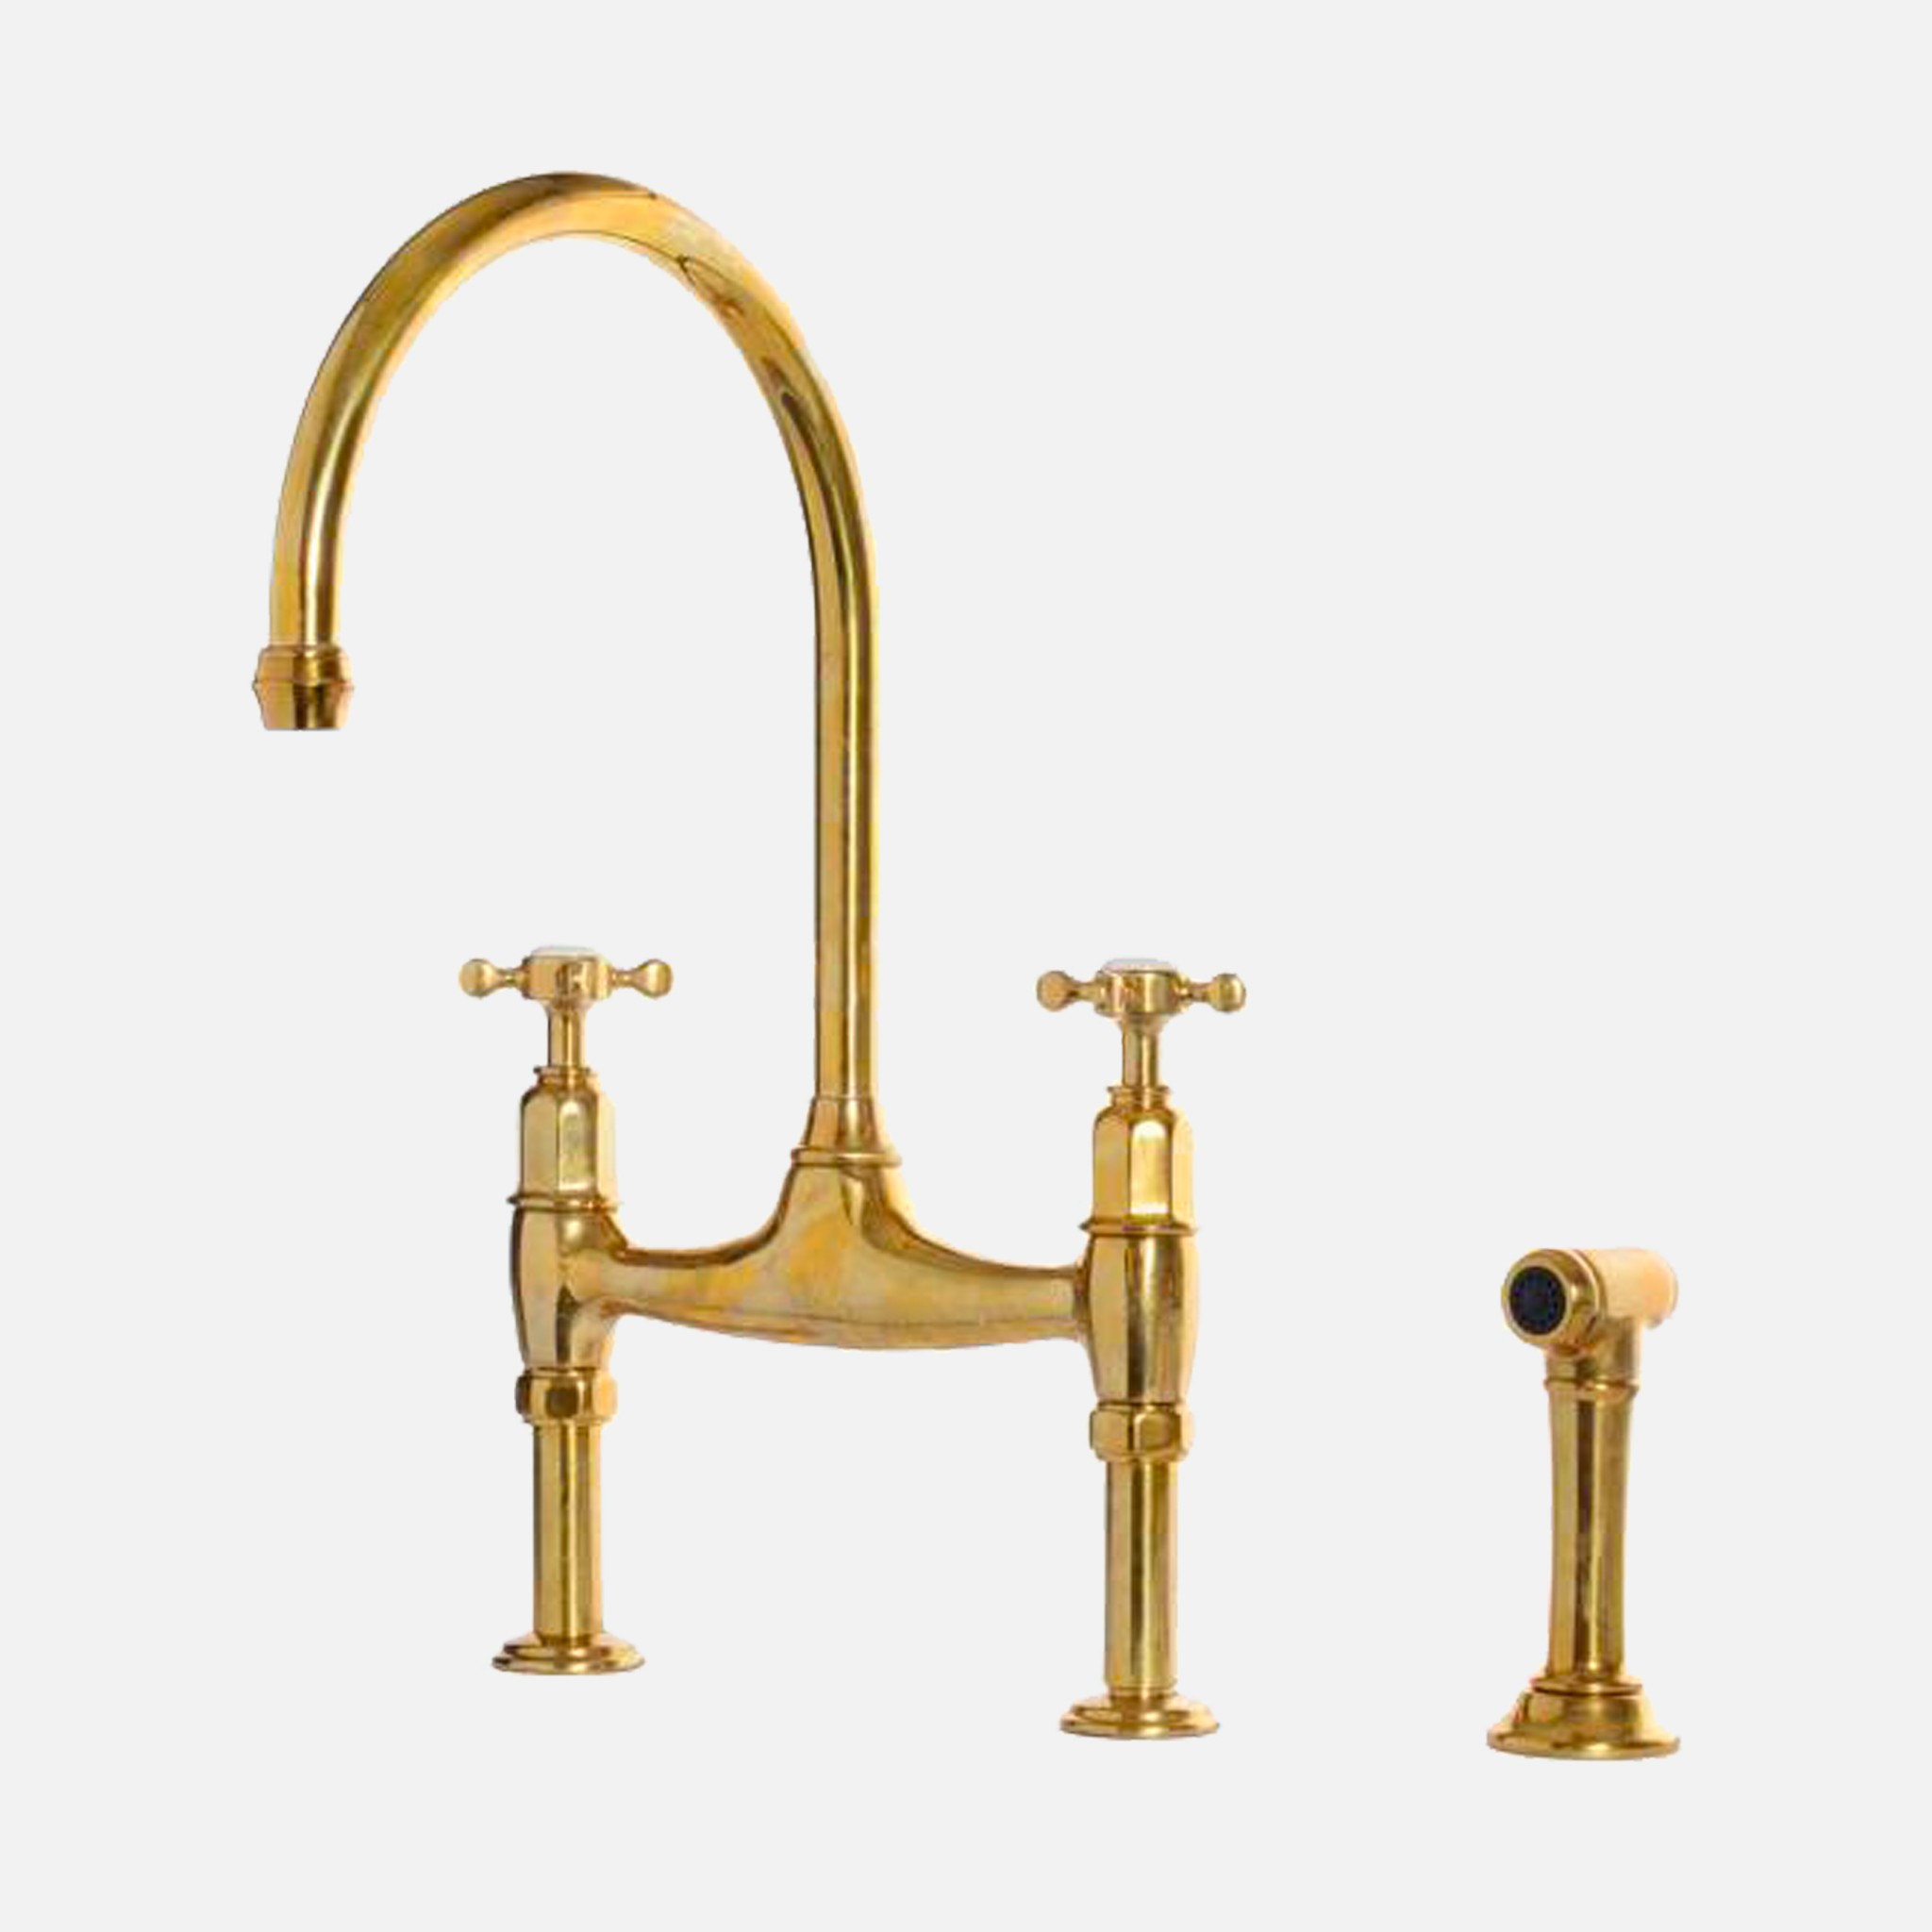 The image of an deVOL Aged Brass Ionian Tap product